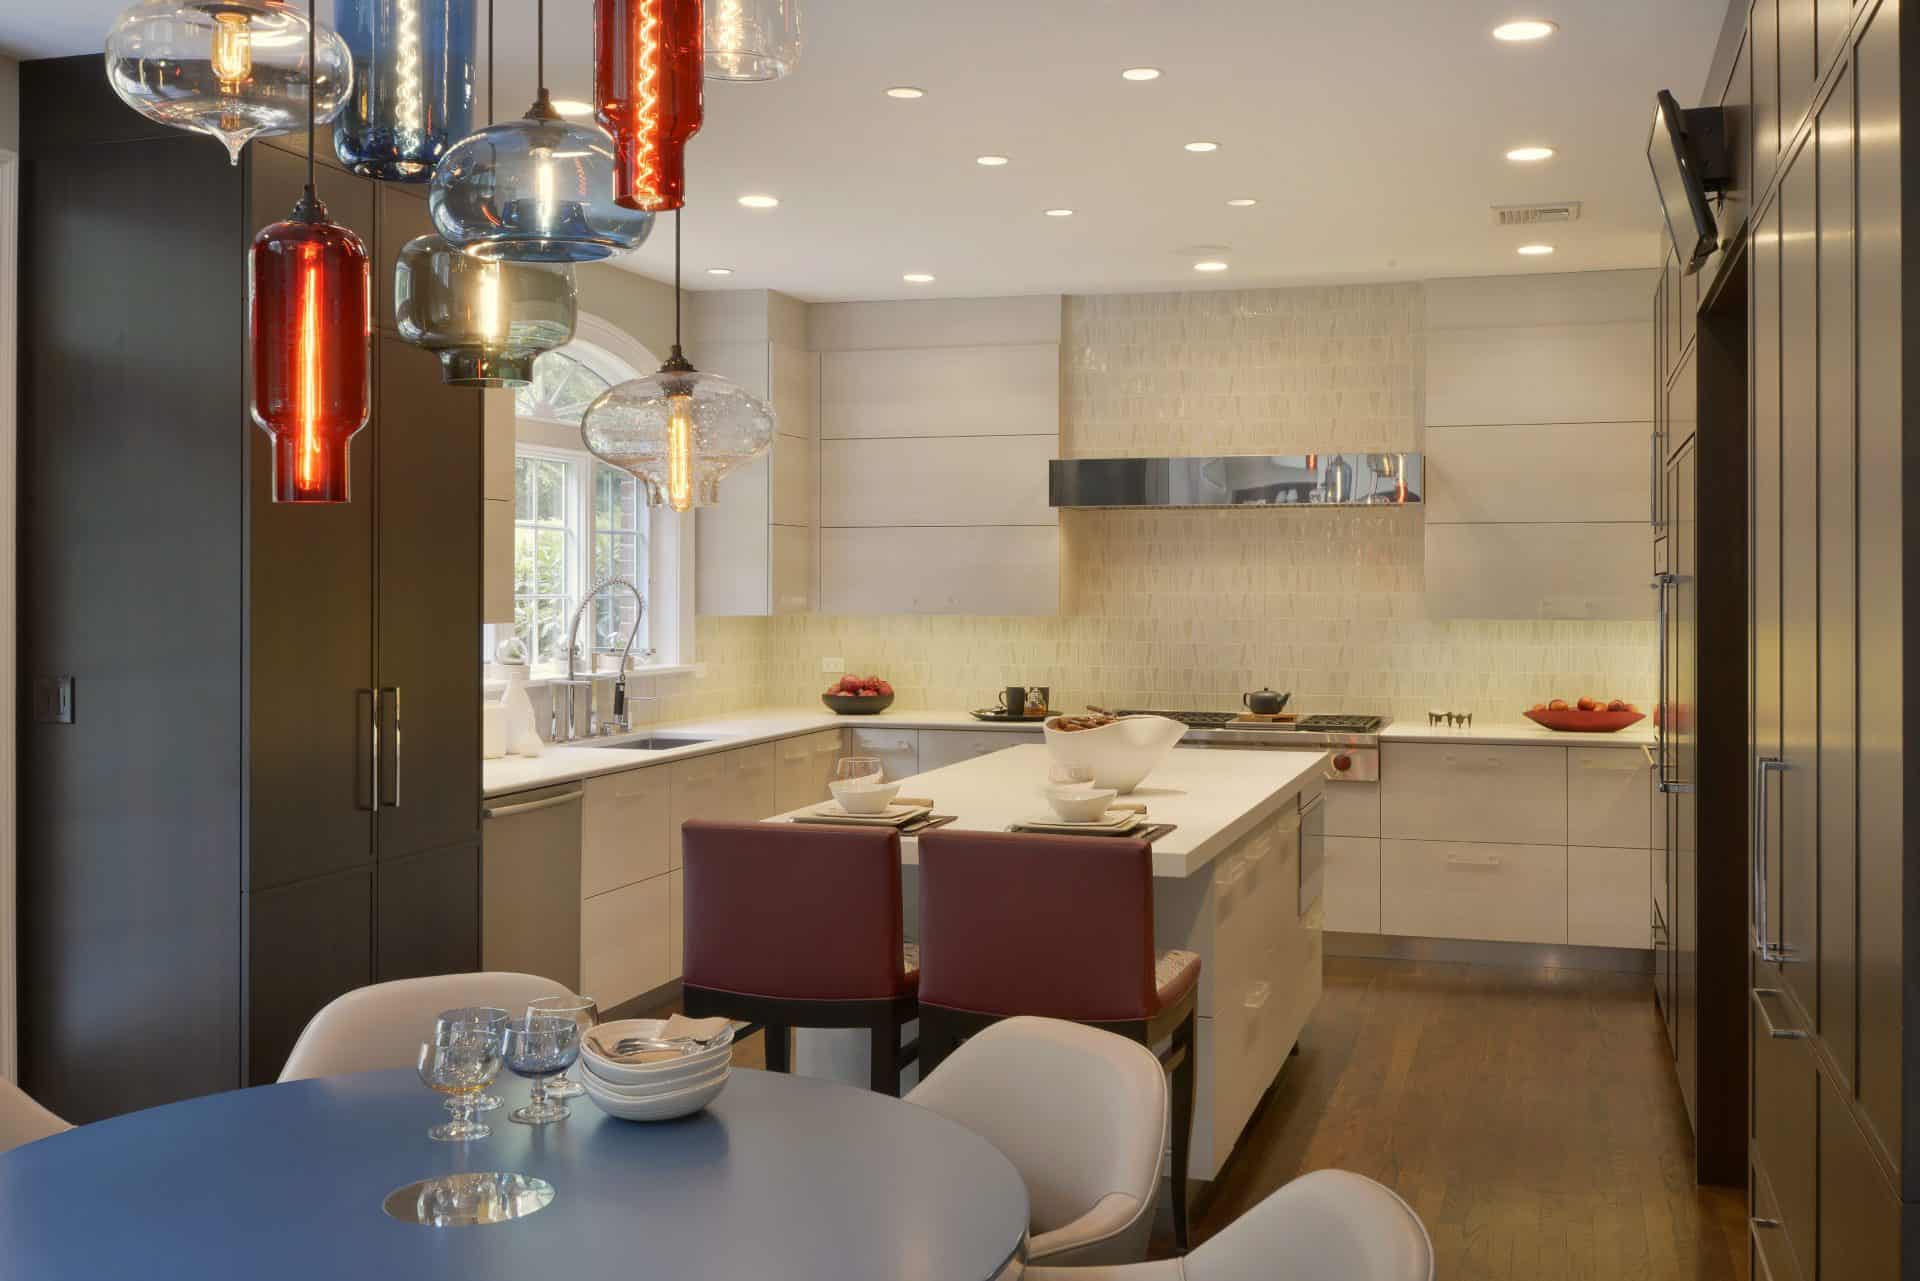 U-shaped Armonk kitchen features a center island and eat-in breakfast nook and fully custom, frameless Artcraft Cabinetry in a mix of flat panel with white textured laminate and shaker style in walnut. Red accents appear in the leather stools at the island and the pendant lights over the breakfast nook.